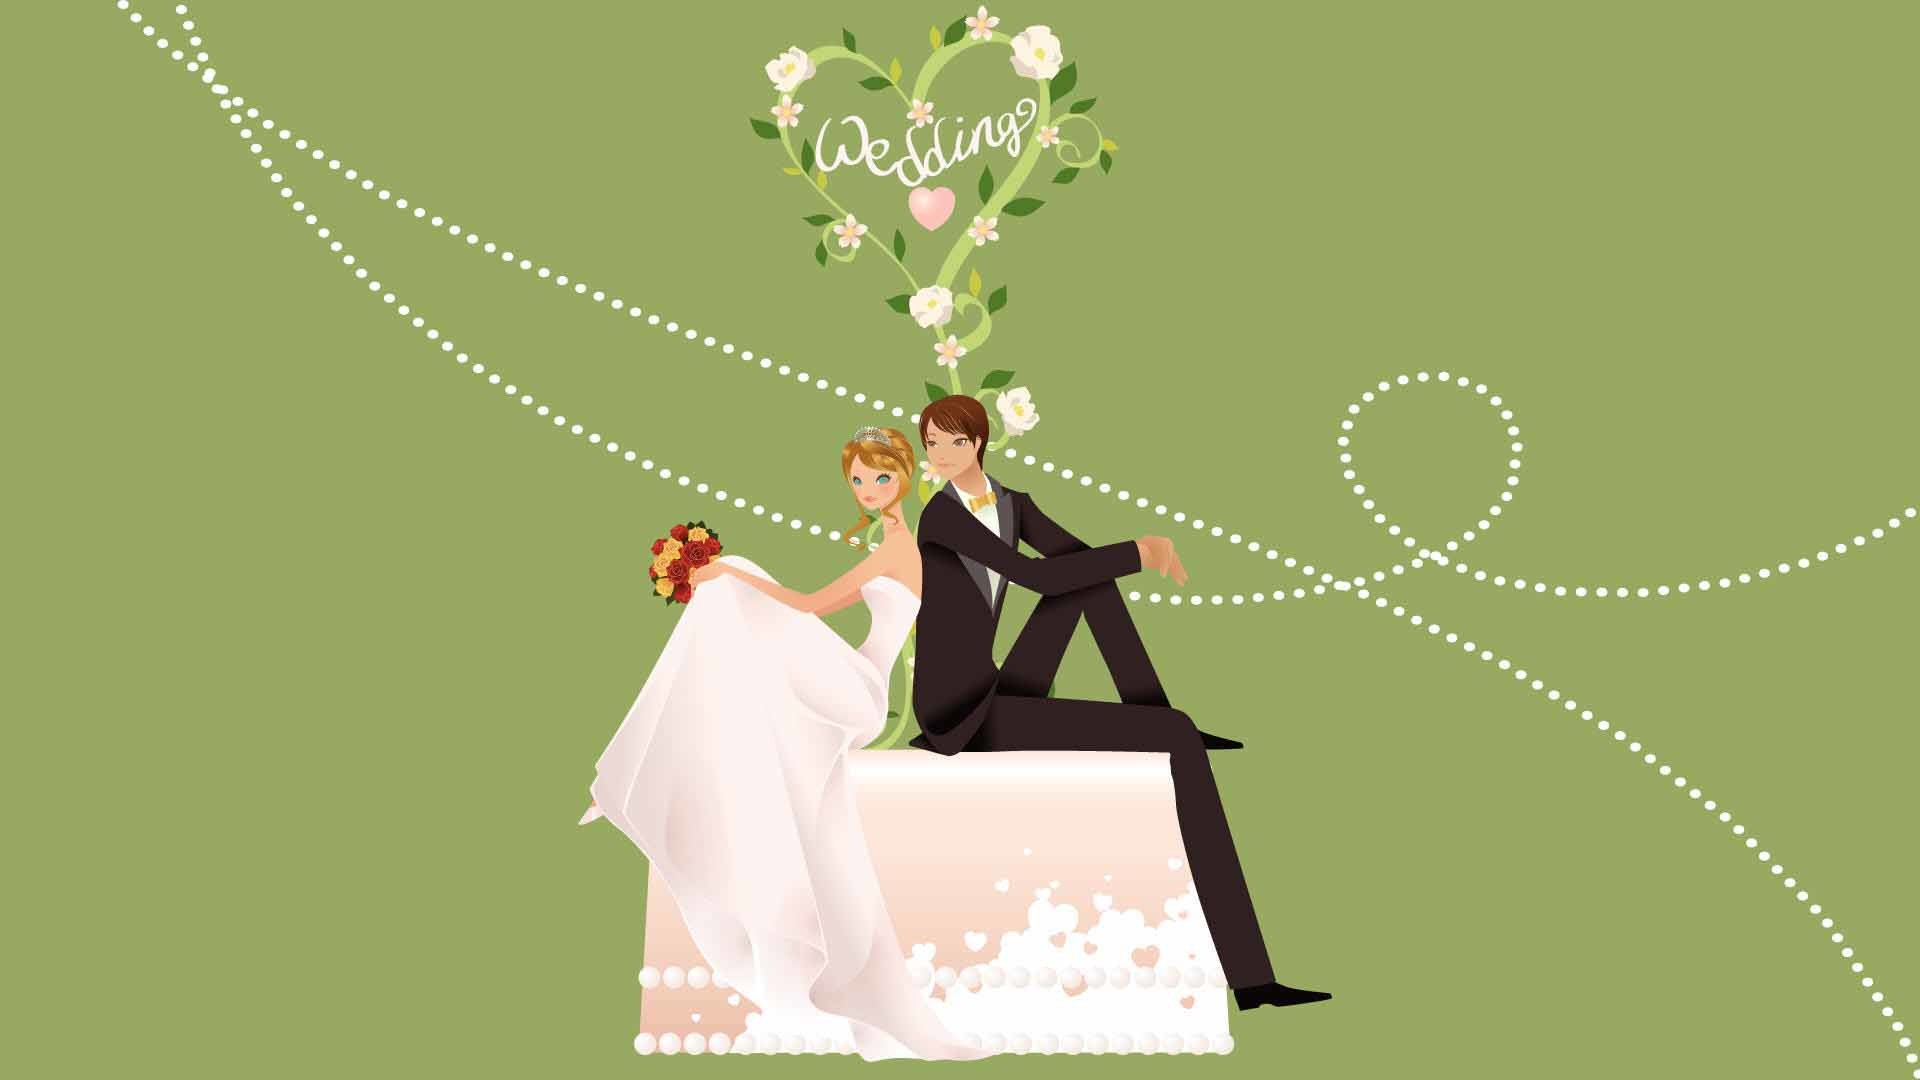 1920x1080 Wedding Background | HD Wallpapers P